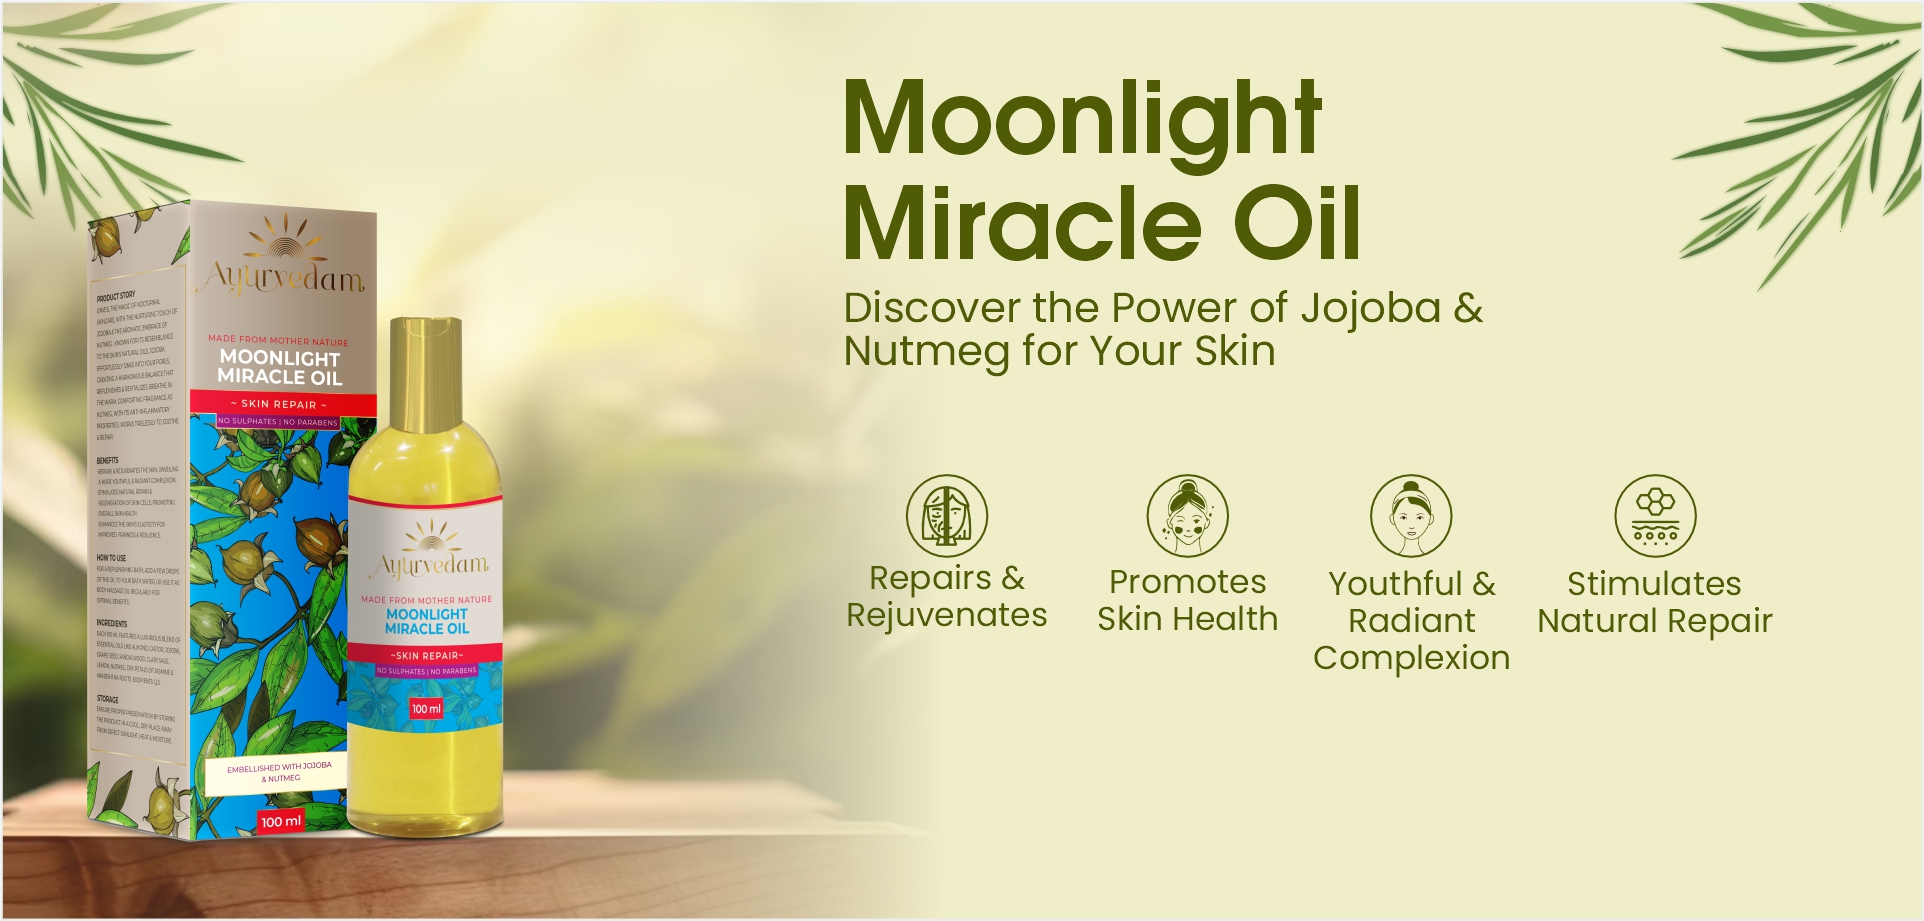 Ayurvedam Moonlight Miracle Oil Banner with it's benefits Listed